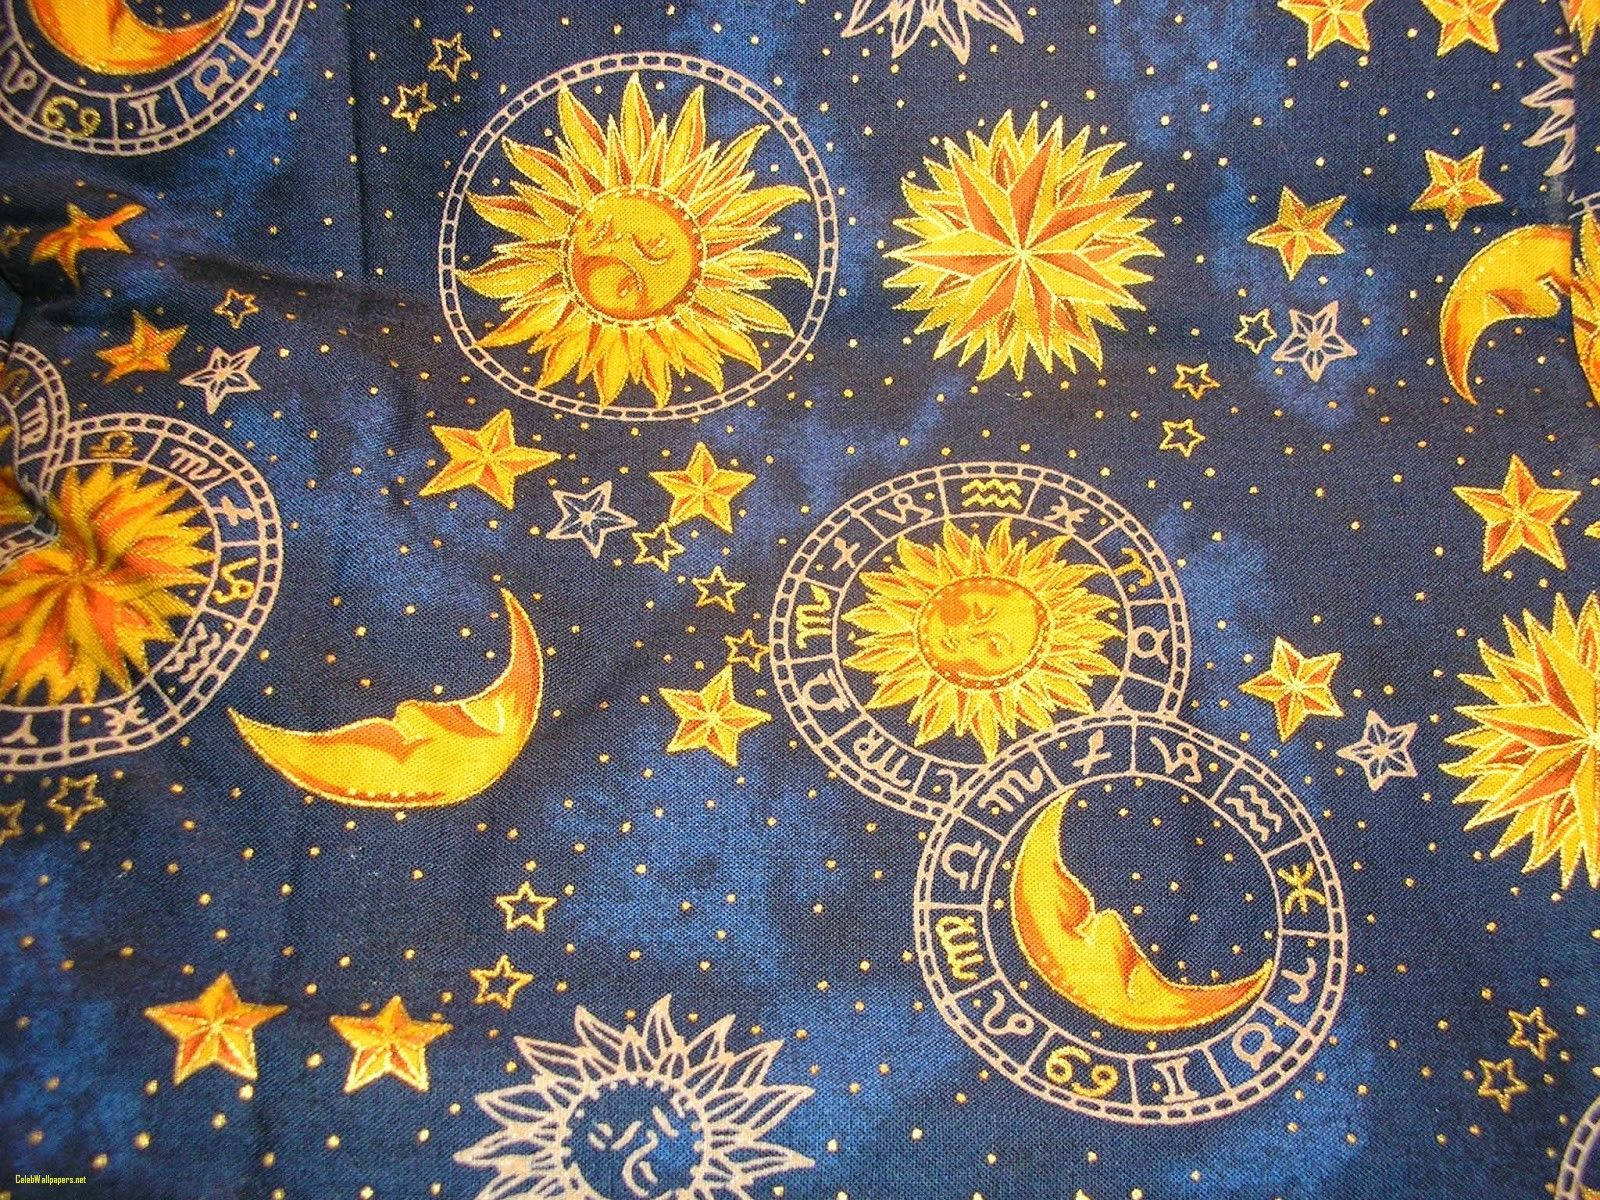 A Blue Fabric With Sun, Moon And Stars On It Wallpaper